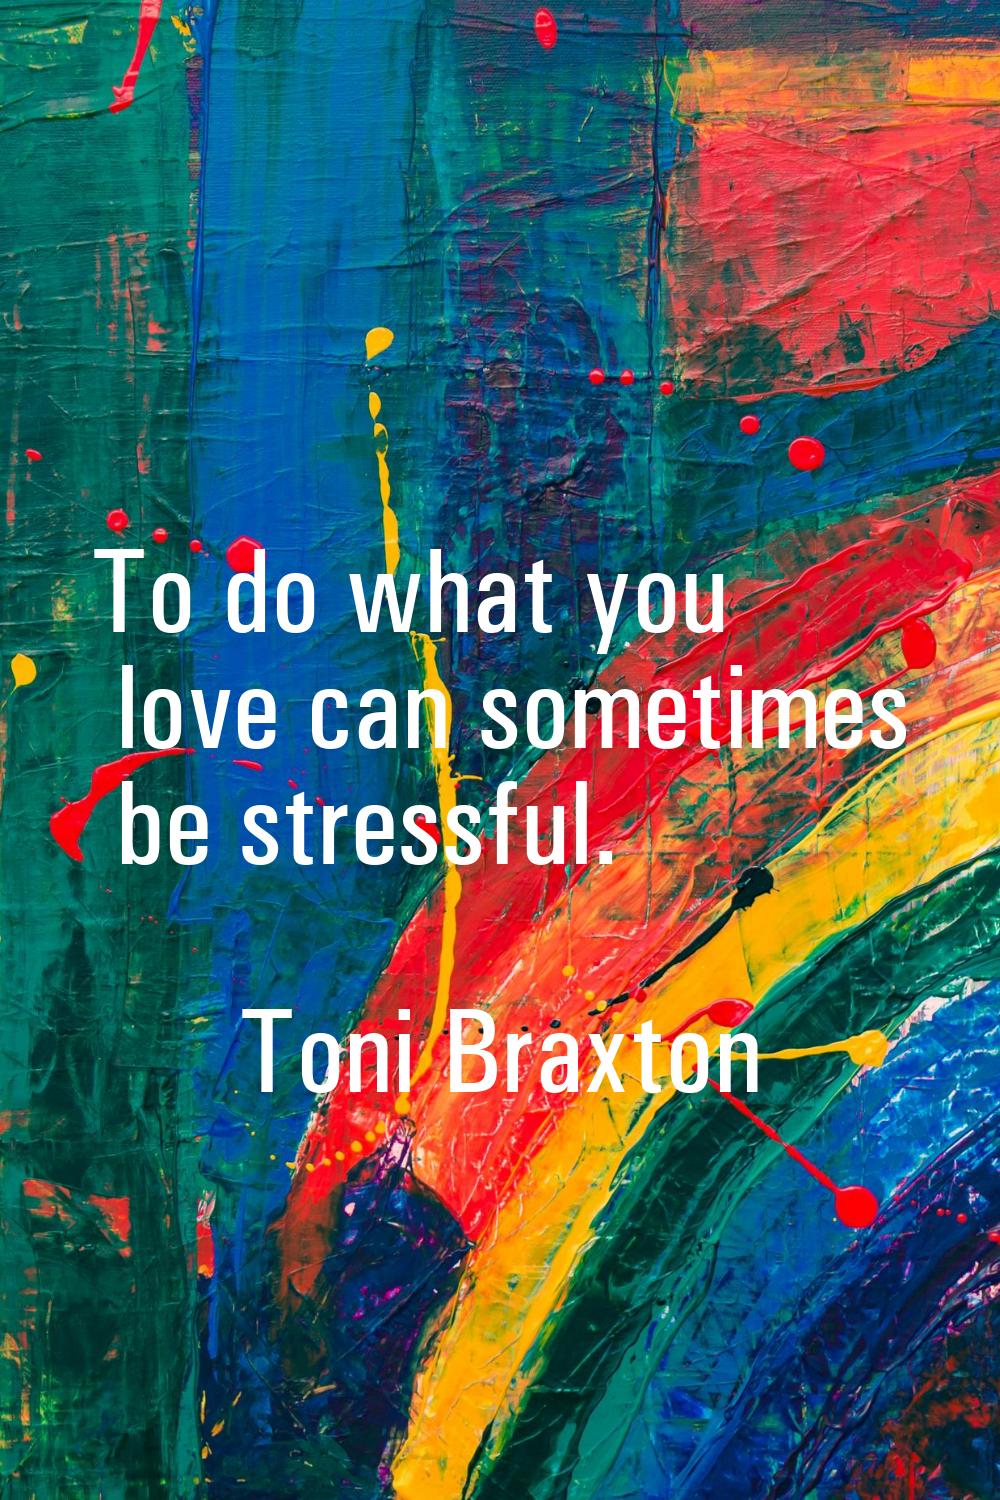 To do what you love can sometimes be stressful.